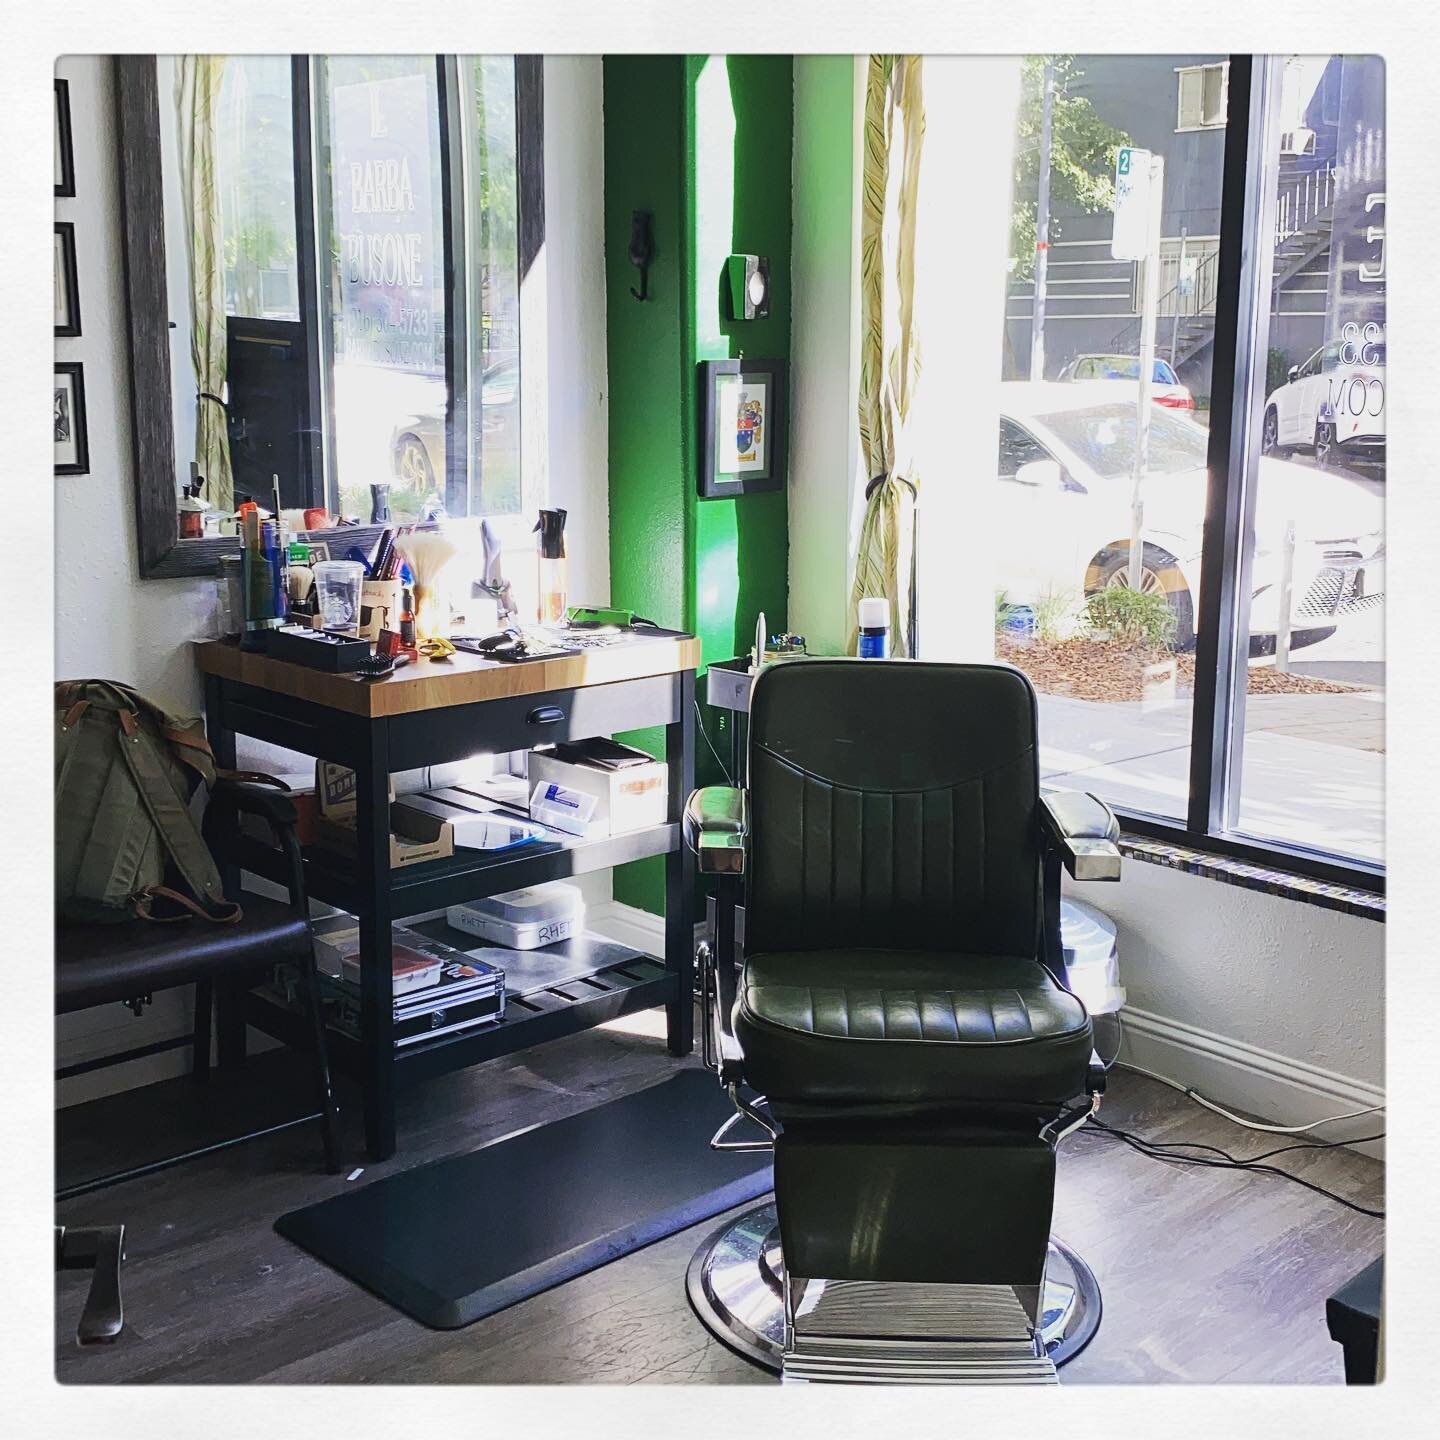 Good morning shop! Few last minute cancellations today so reach out if you need to get chopped!!
#dontforgetyourmask #happysaturday #barbershop #sacramento #sacramentobarber